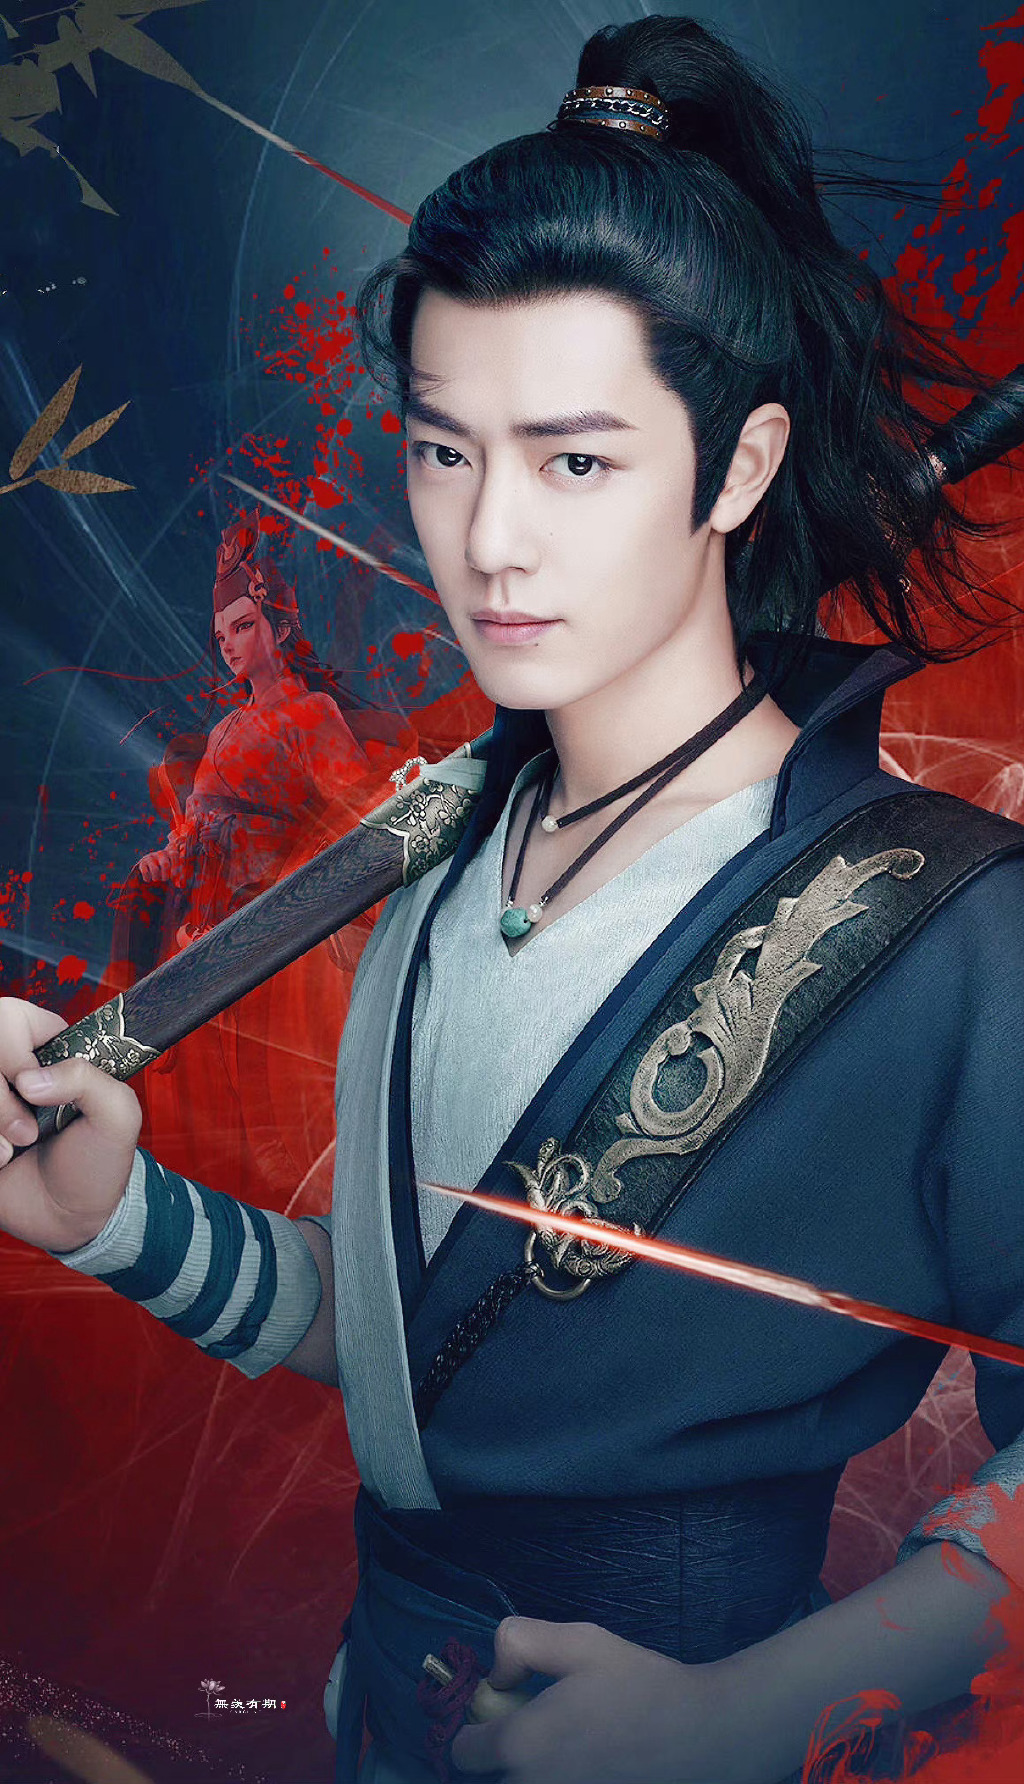 Xiao Zhan starred in the new version of 